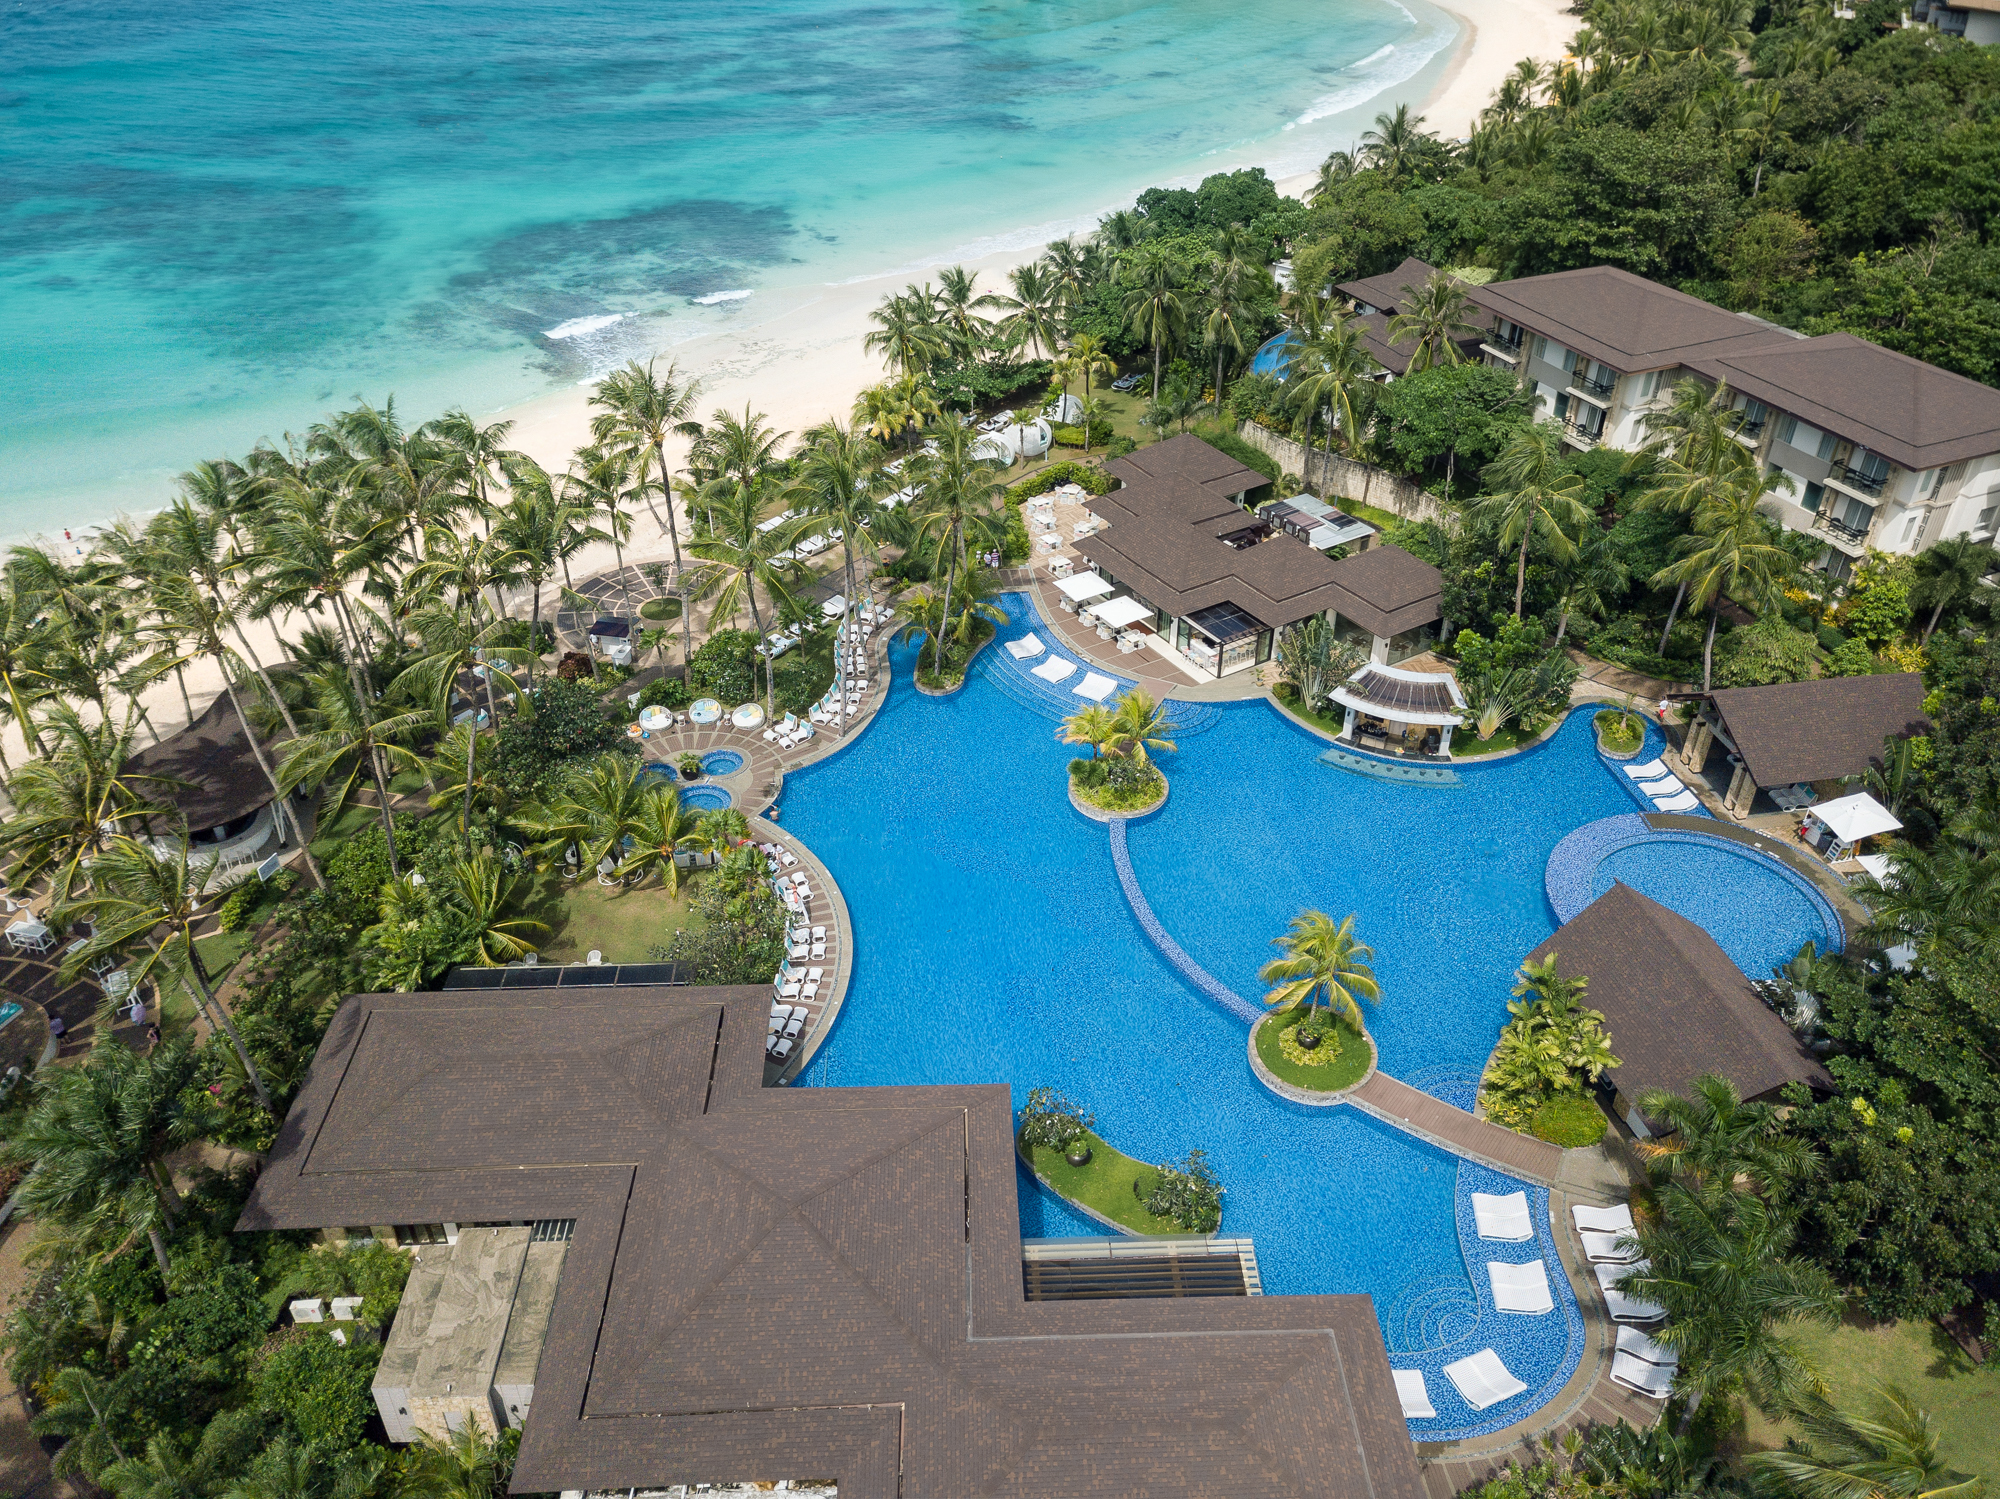 Aerial view Movenpick Resort and Spa Boracay showing Station 0 beach and pool